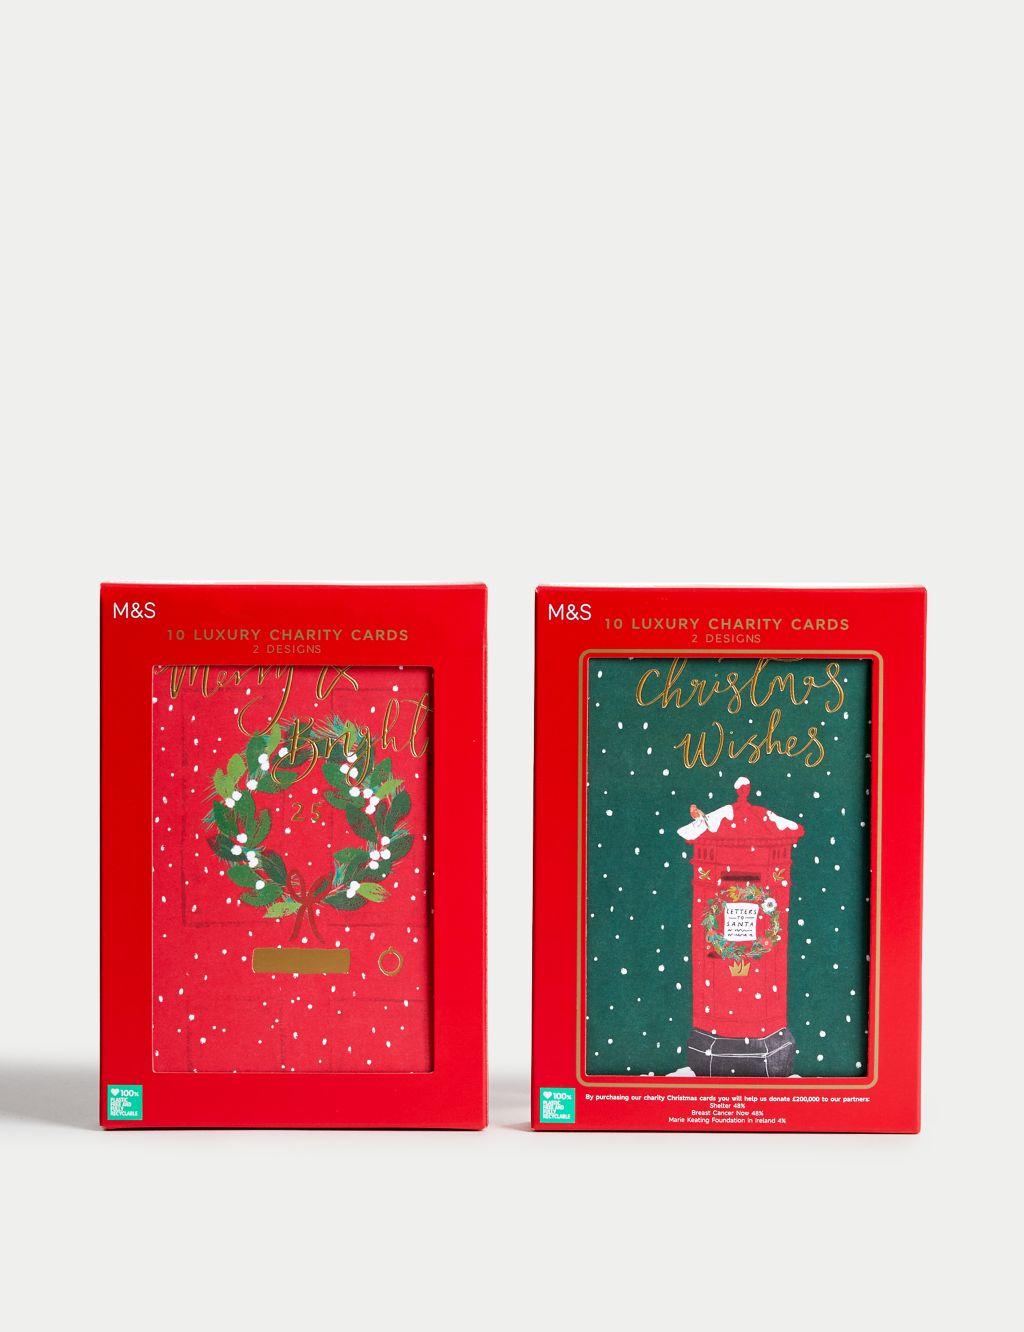 Luxury Charity Christmas Cards - Festive Designs